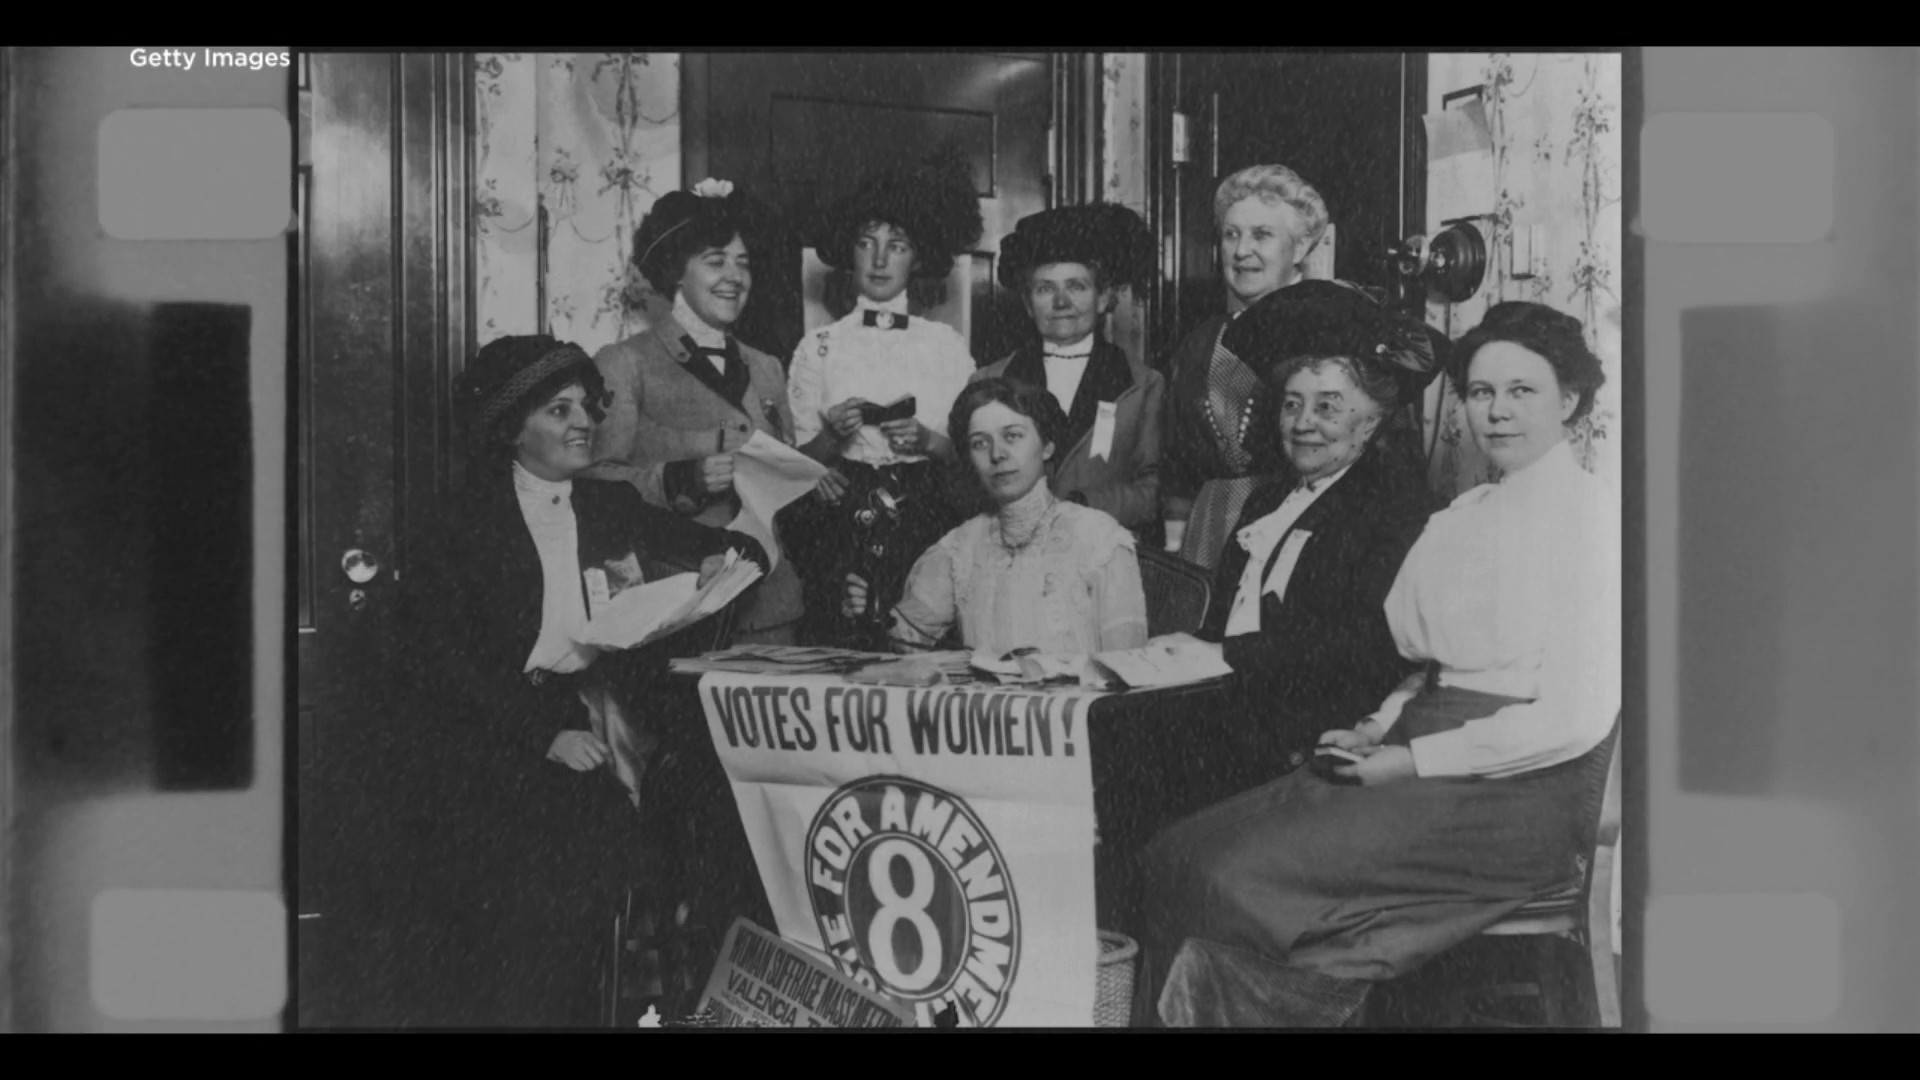 19th Amendment anniversary: A timeline of 100 years of voting